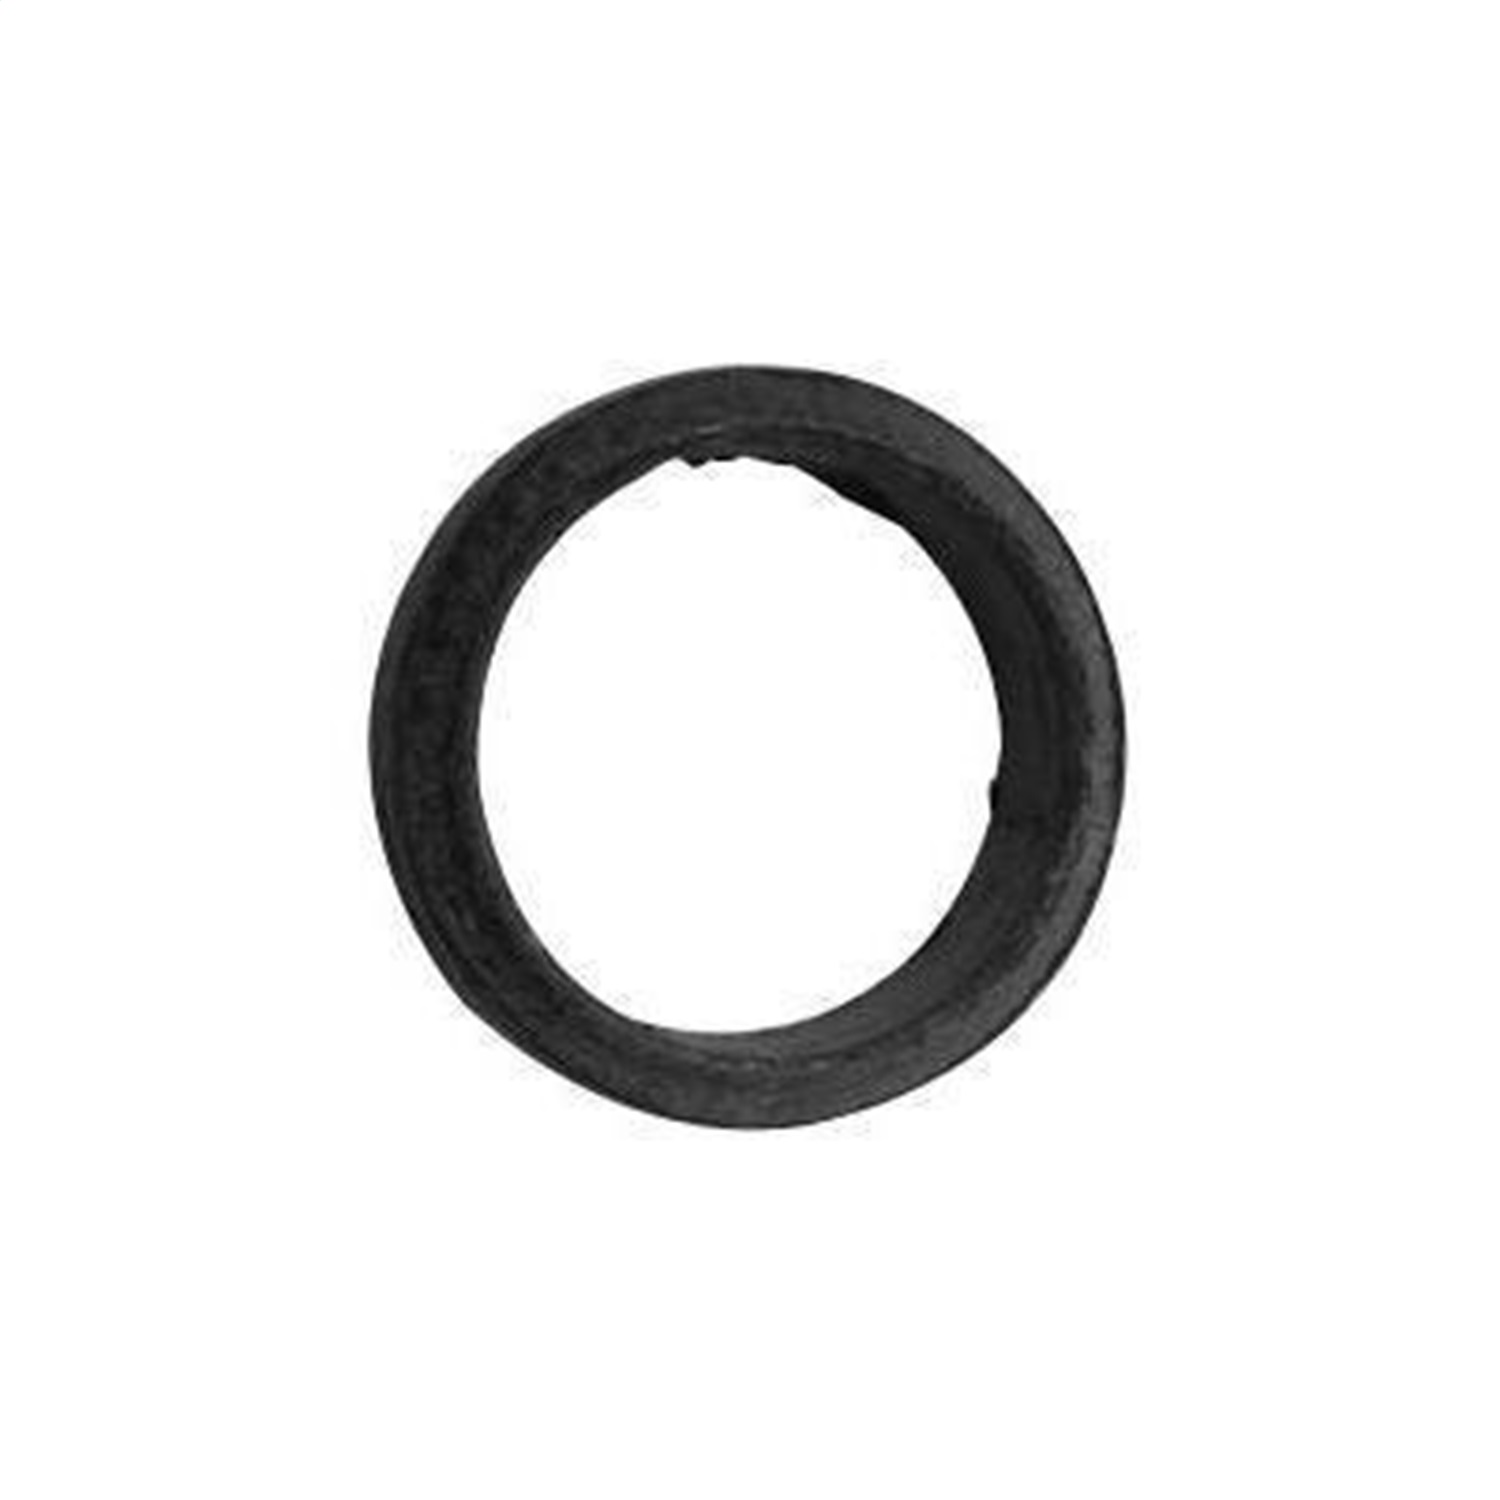 Exhaust Pipe Flange Gasket 1968-1973 Ford Mustang